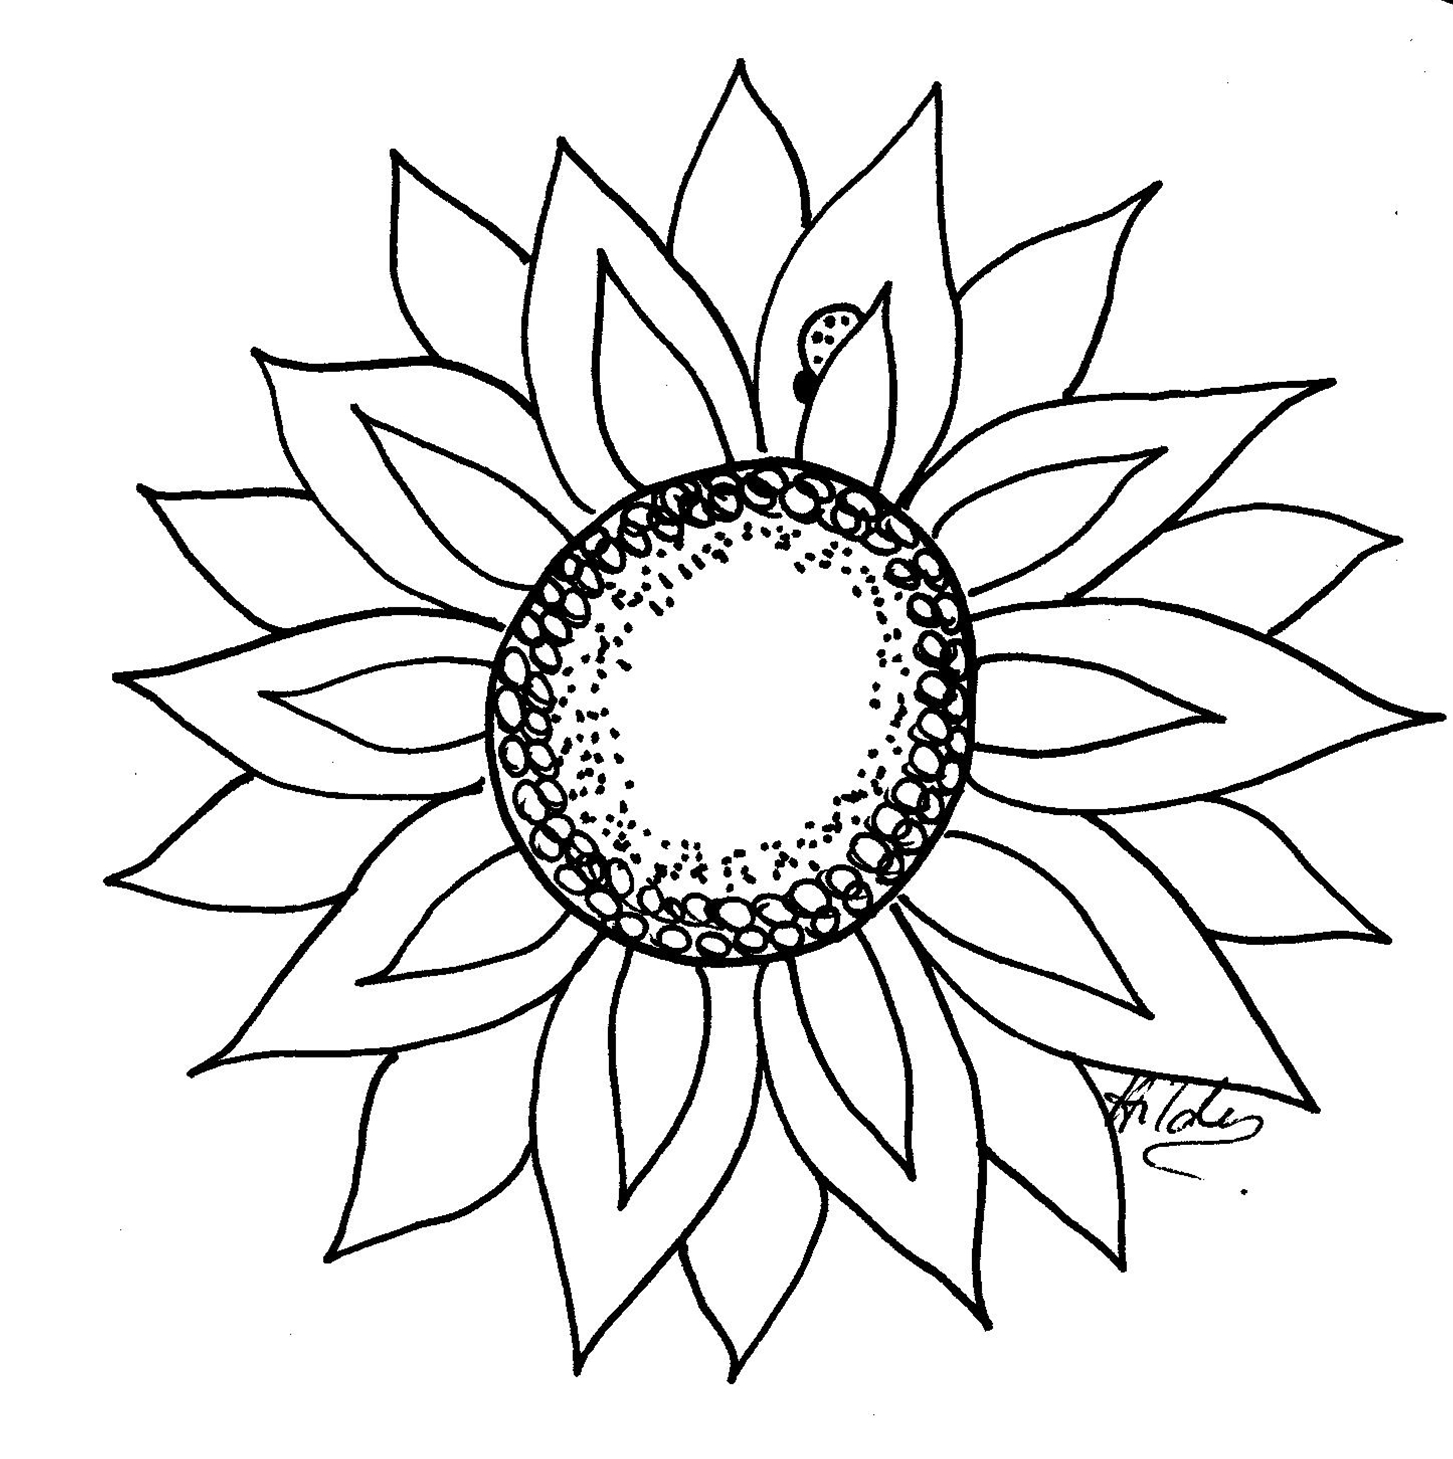 Those Who Bring Sunshine" Printable Sheet Of 6 Sunflower And Free